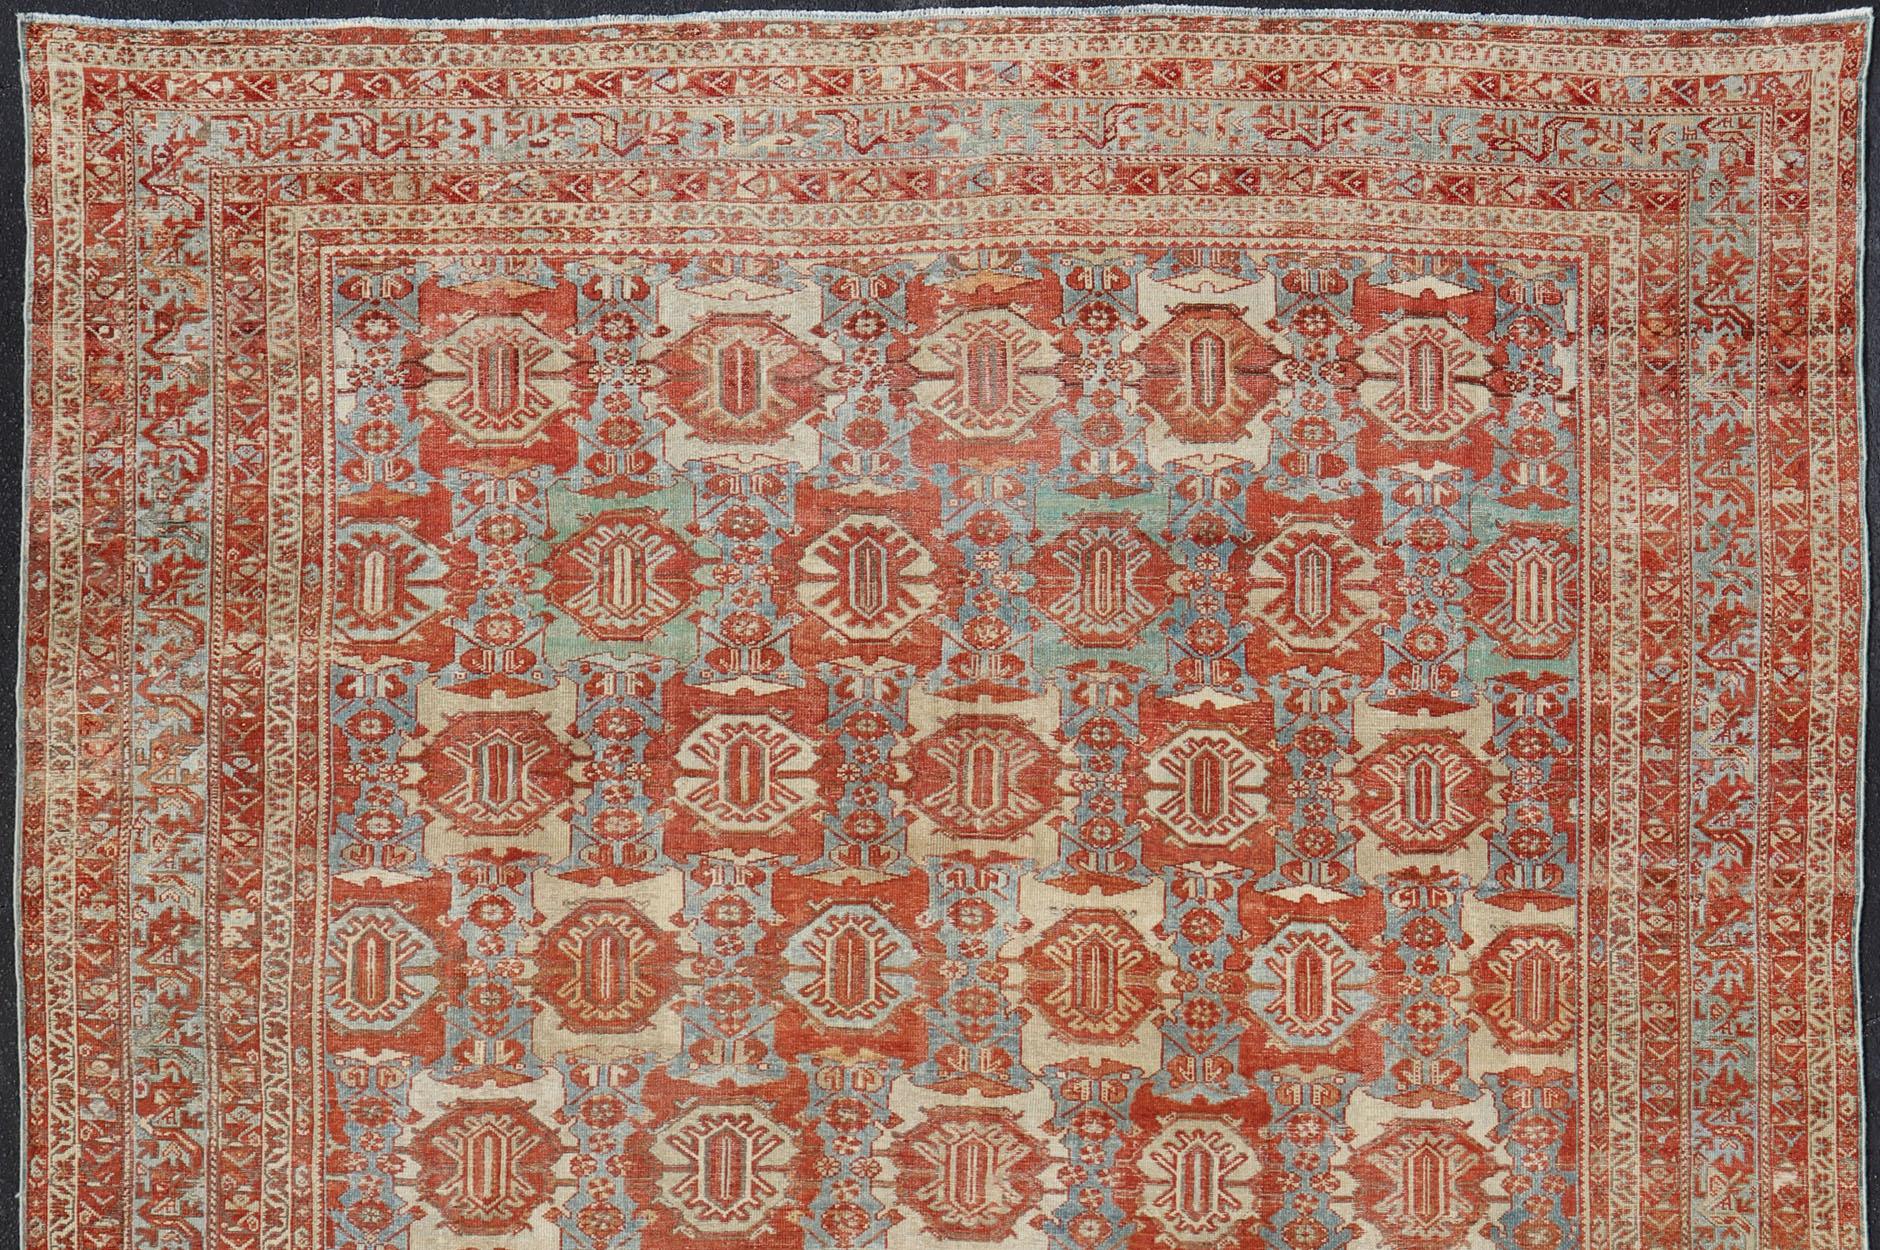 Large scale antique Persian Hamedan rug with colorful blossom design, rug 18-0503, Keivan Woven Arts /country of origin / type: Iran / Hamadan, circa 1890s.

This beautiful antique late 19th century Persian Hamedan carpet features an all-over